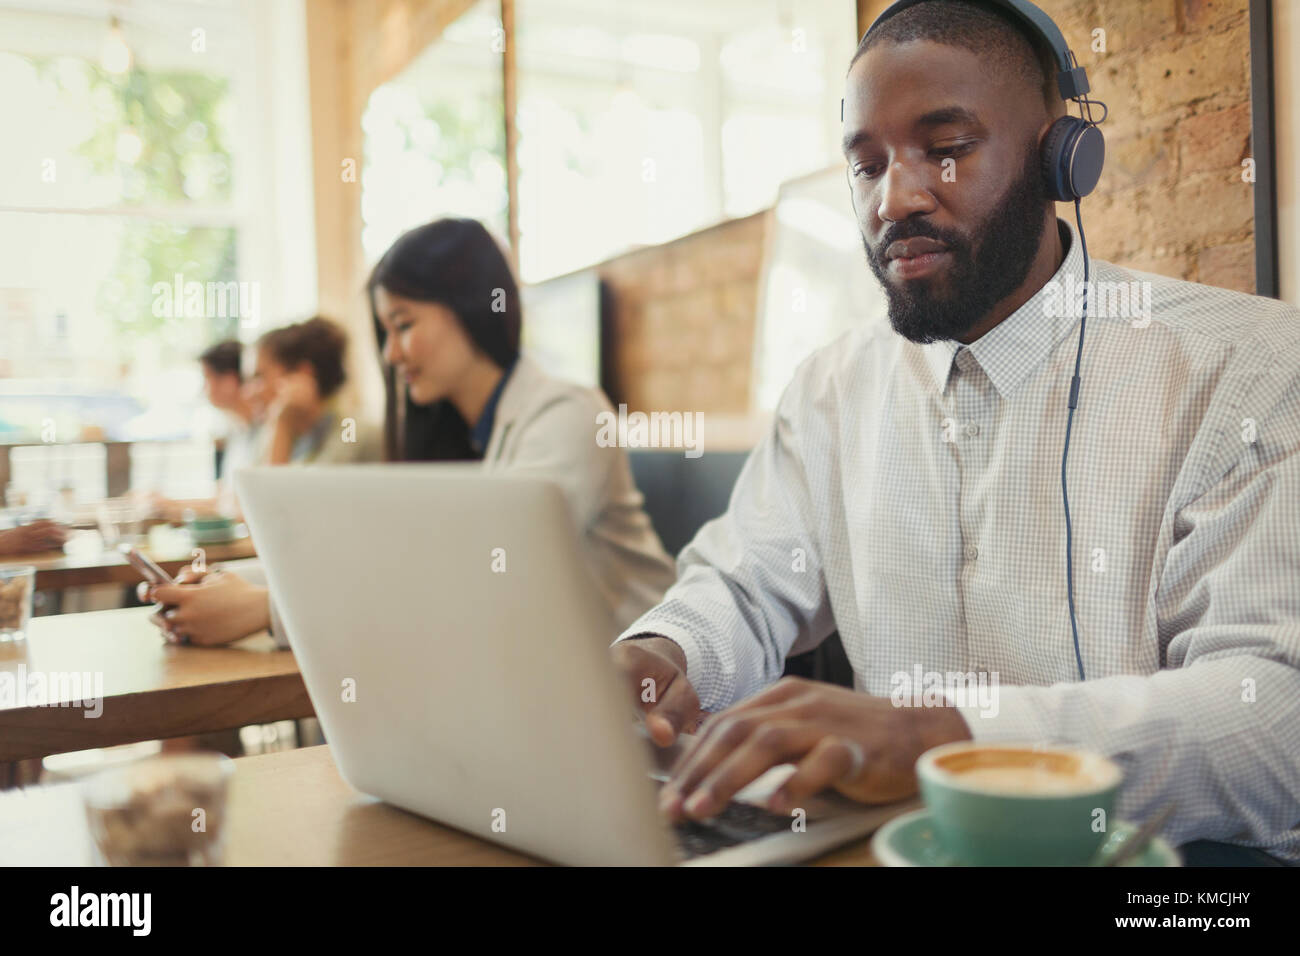 Young man with headphones using laptop and drinking coffee at cafe table Stock Photo